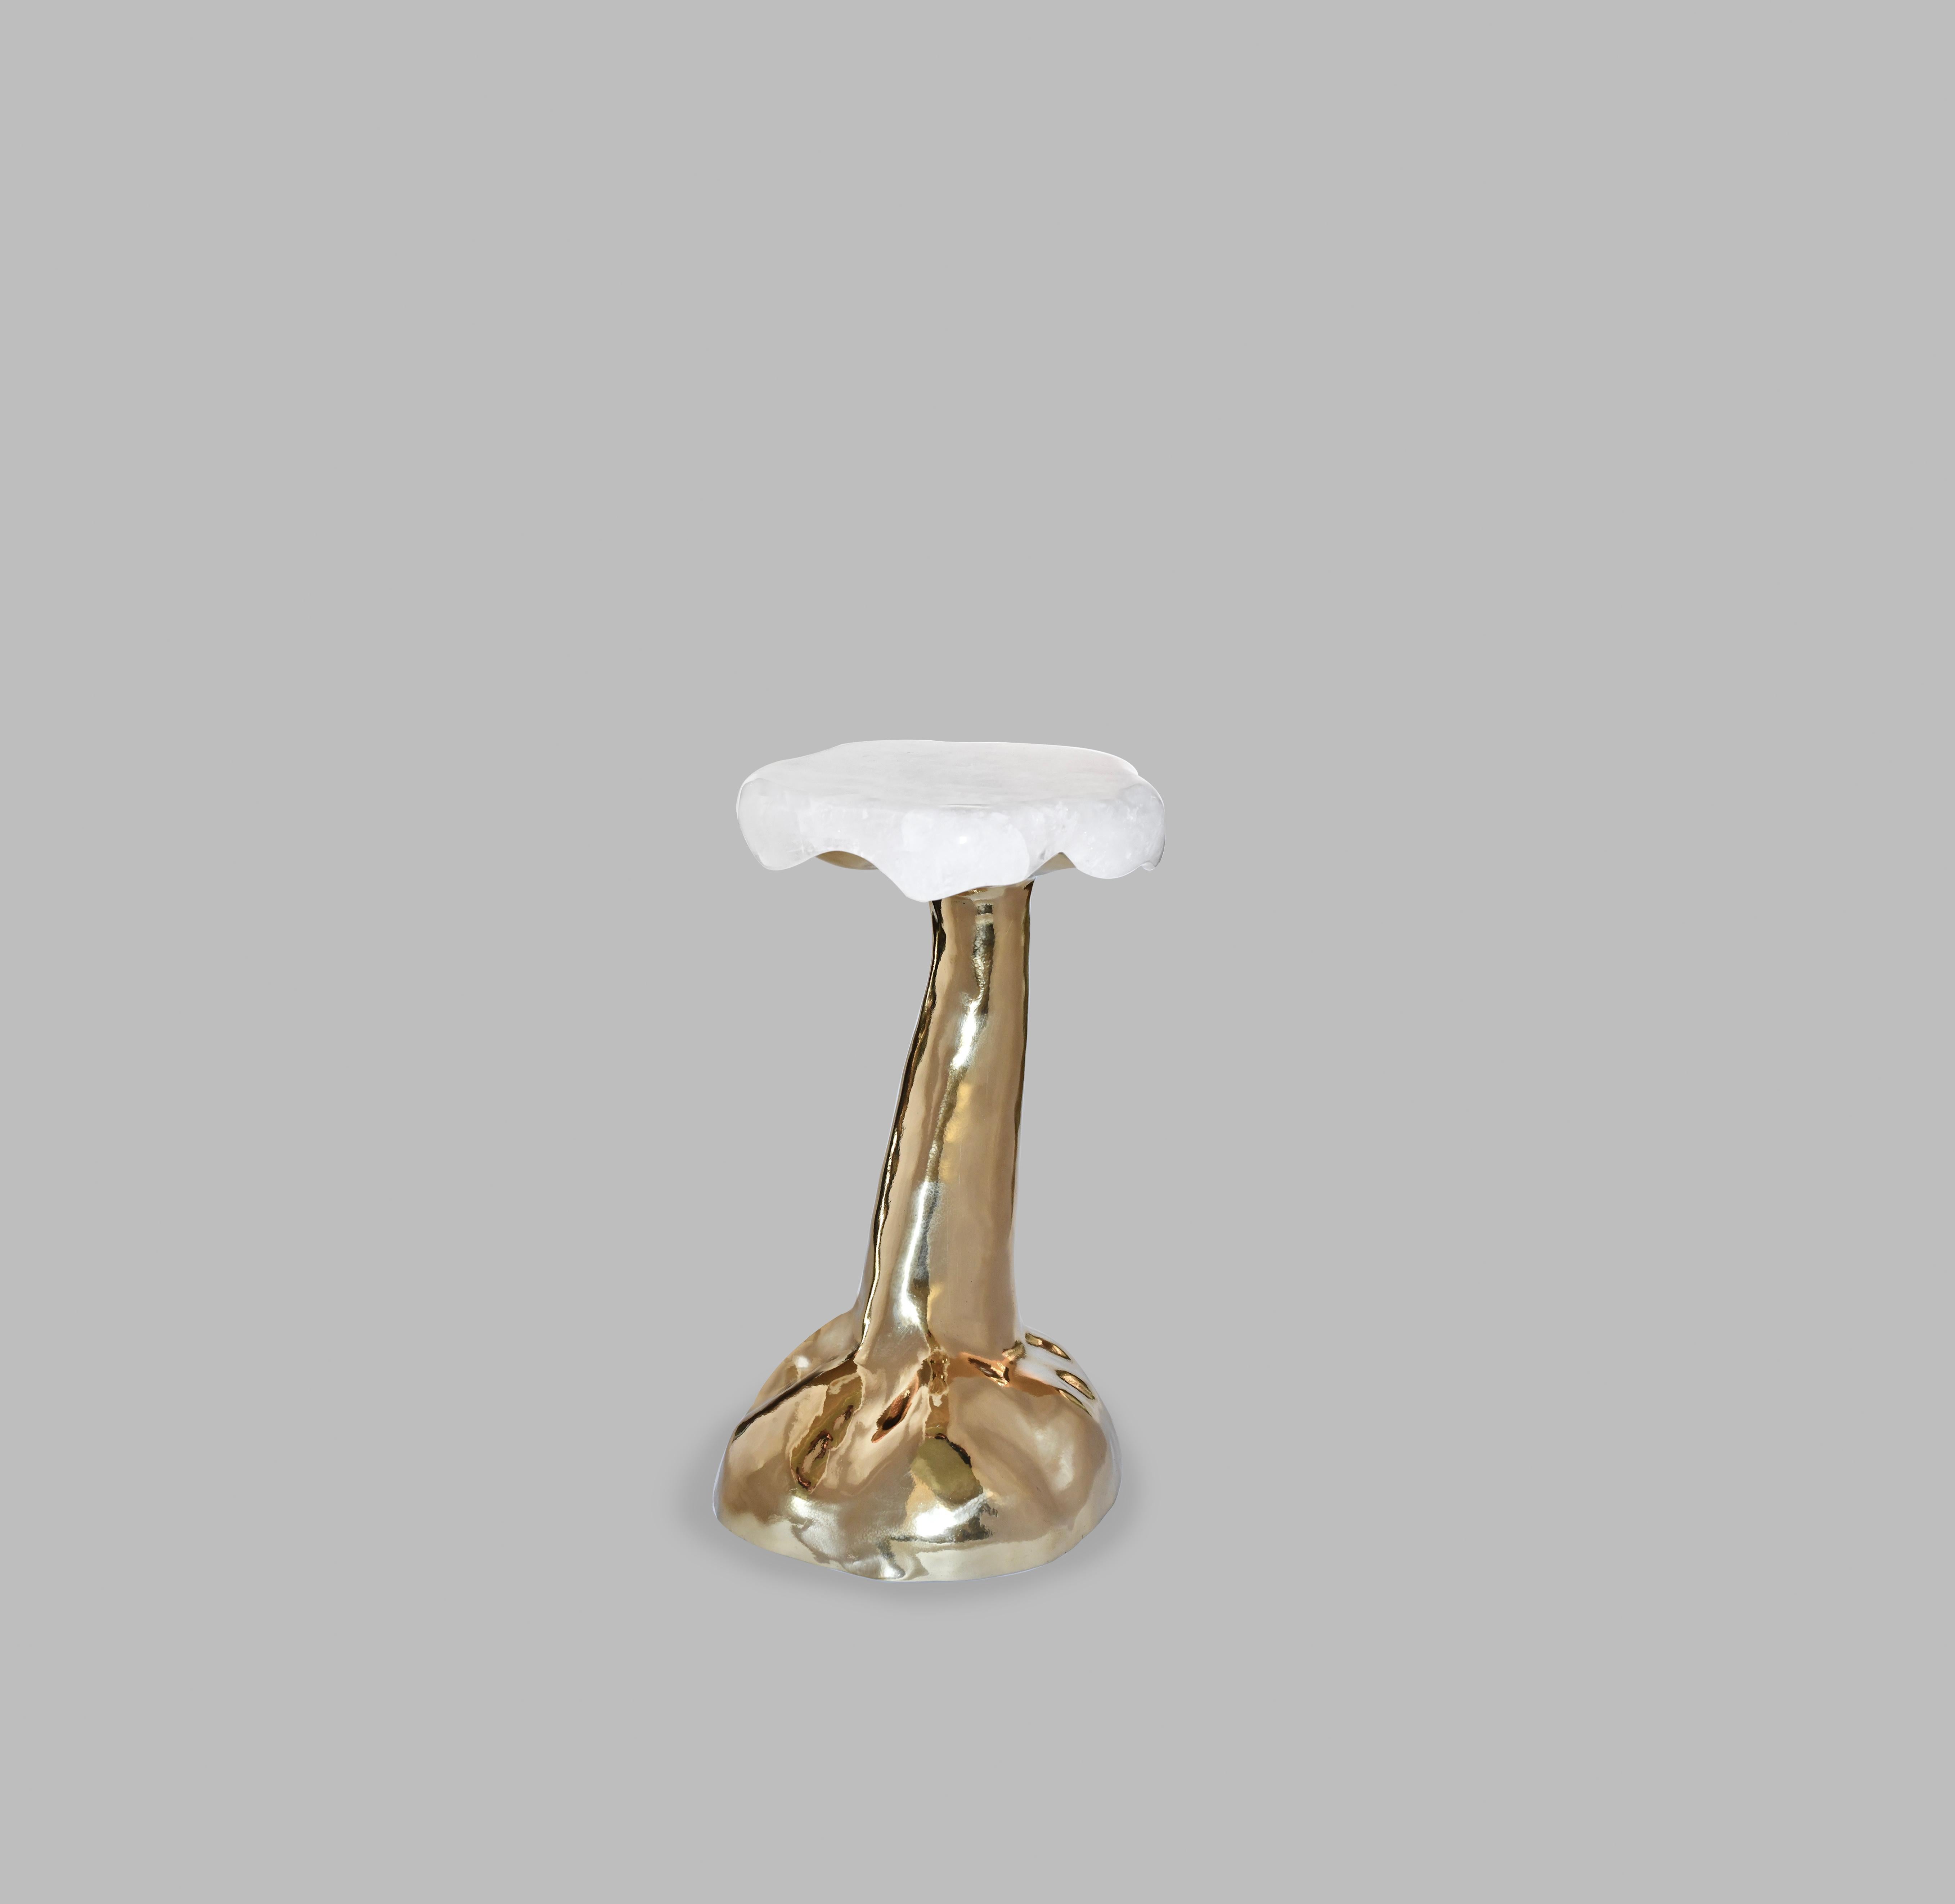 Sculptured accent table with finely carved rock crystal top. Polished brass finish. Created by Phoenix Gallery, NYC.